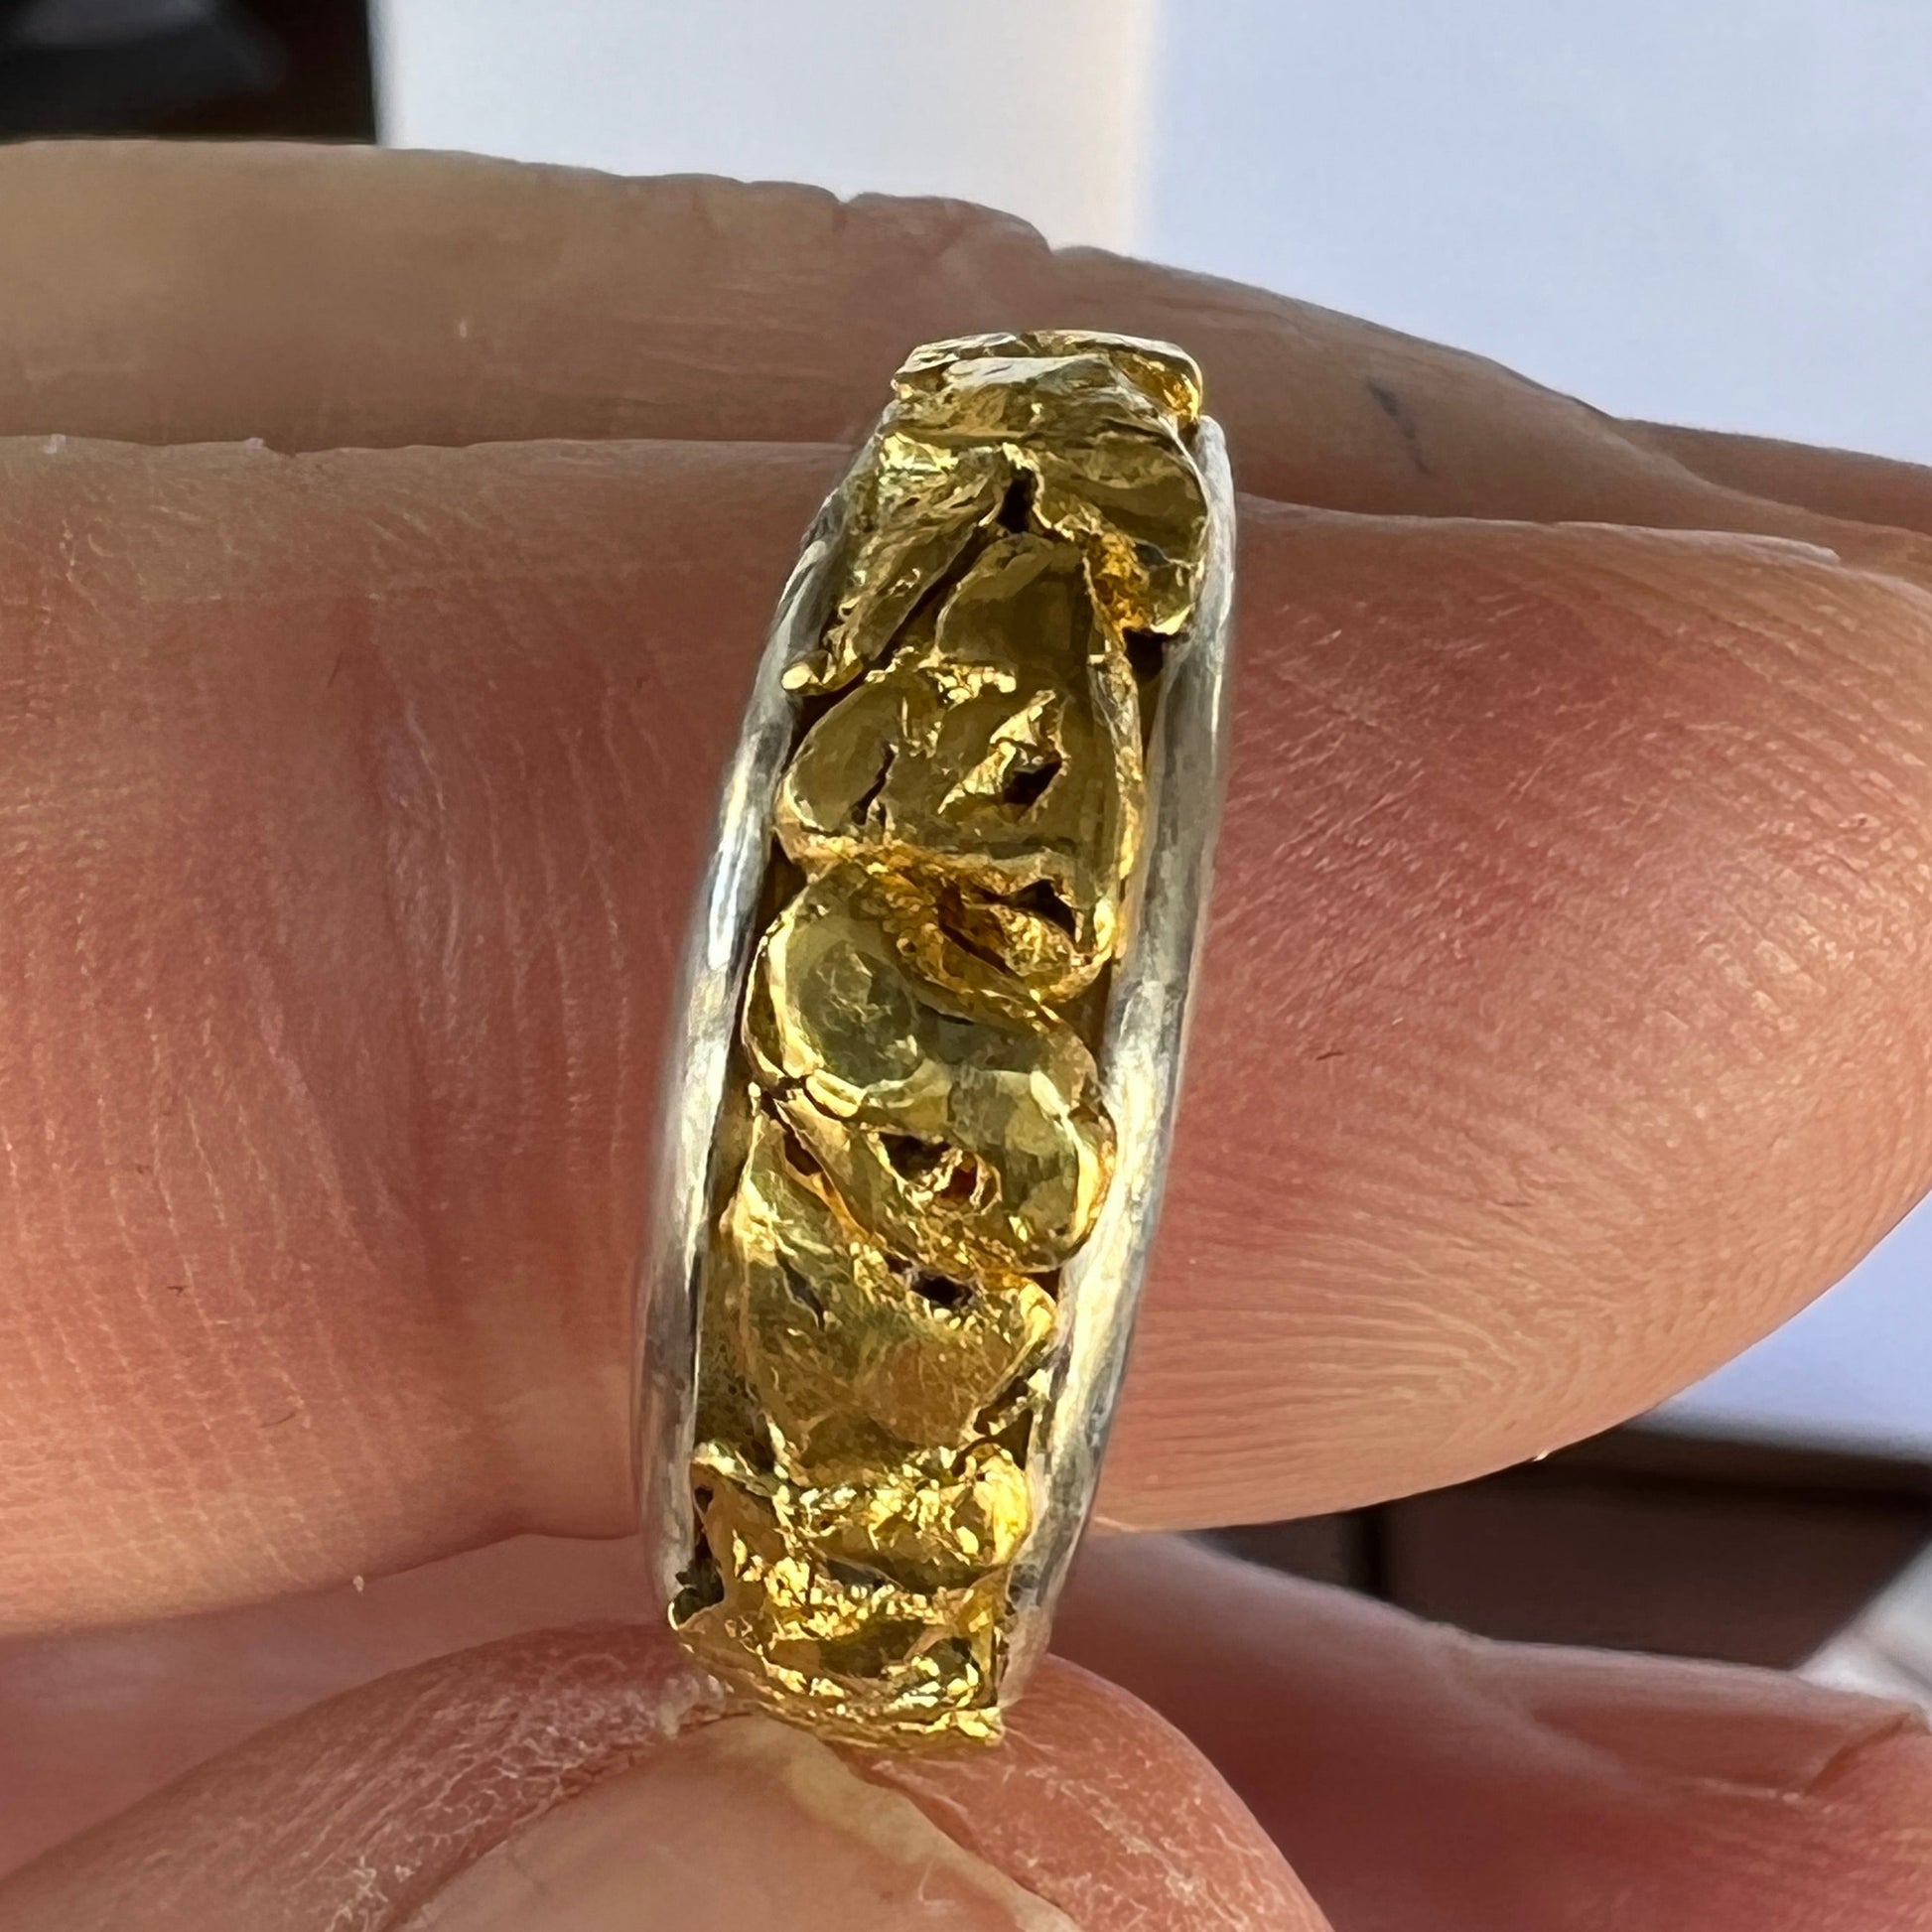 Unique handcrafted ladies ring. Solid silver filled with 2.3 grams of genuine Australian pure gold nuggets from the goldfields of Victoria. 